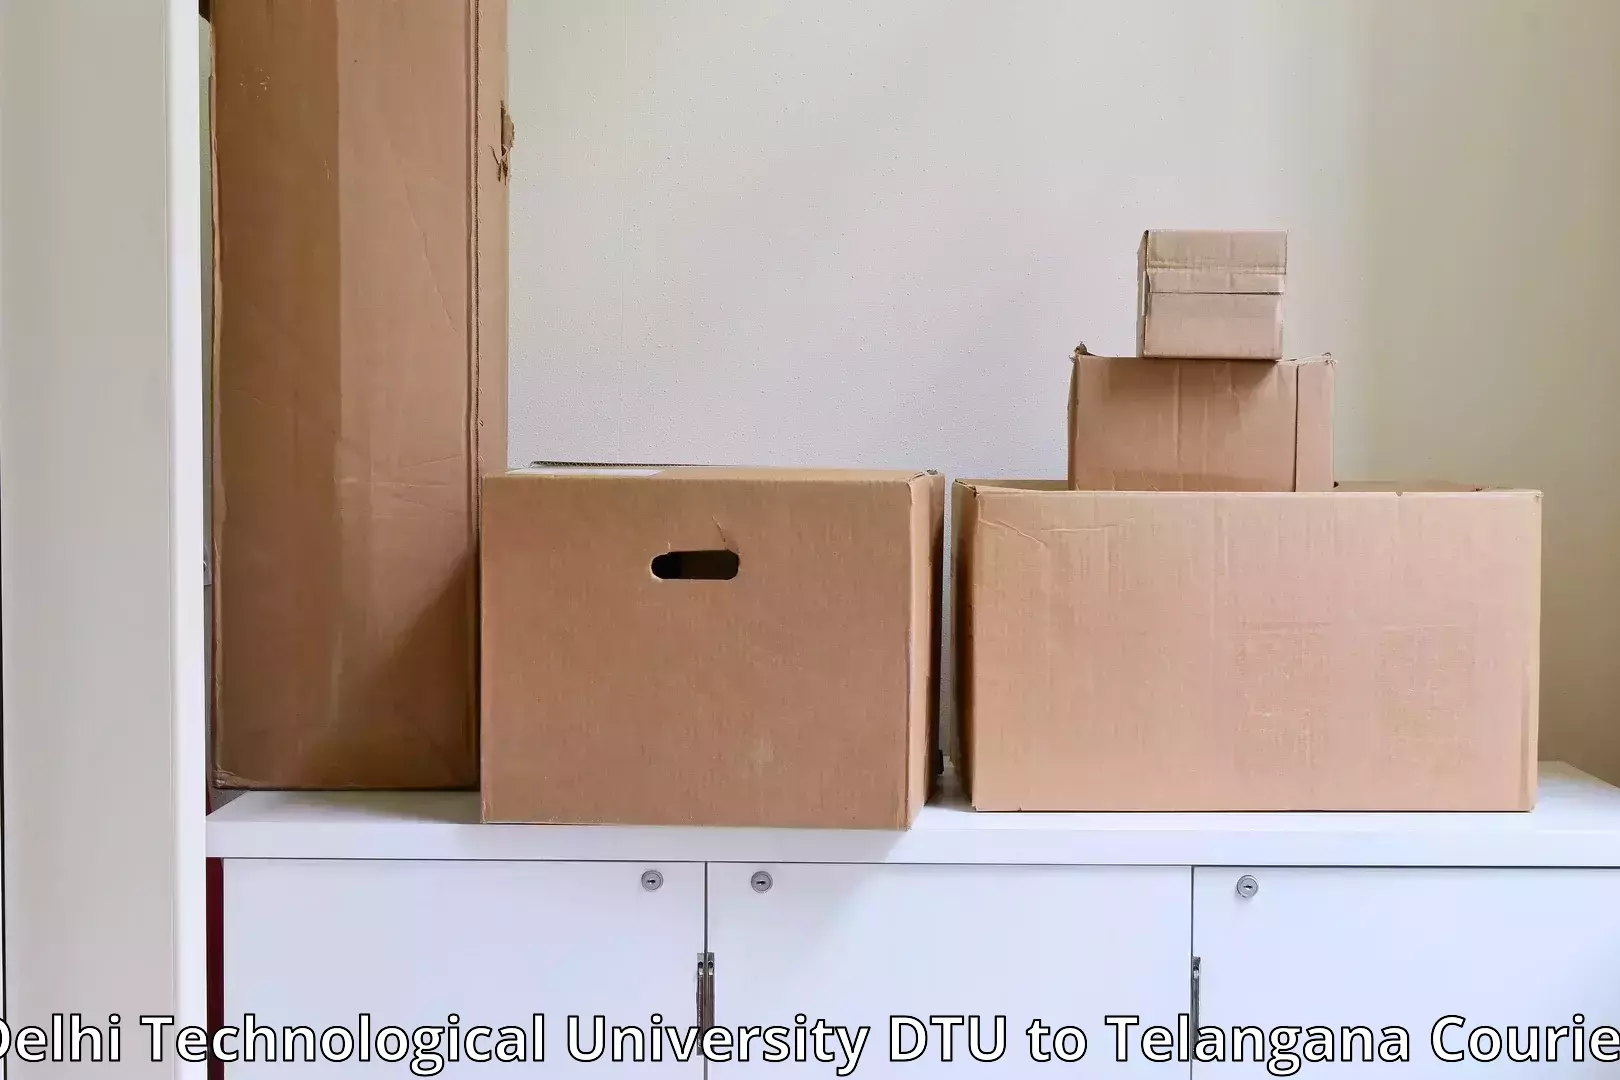 Full-service movers in Delhi Technological University DTU to Telangana